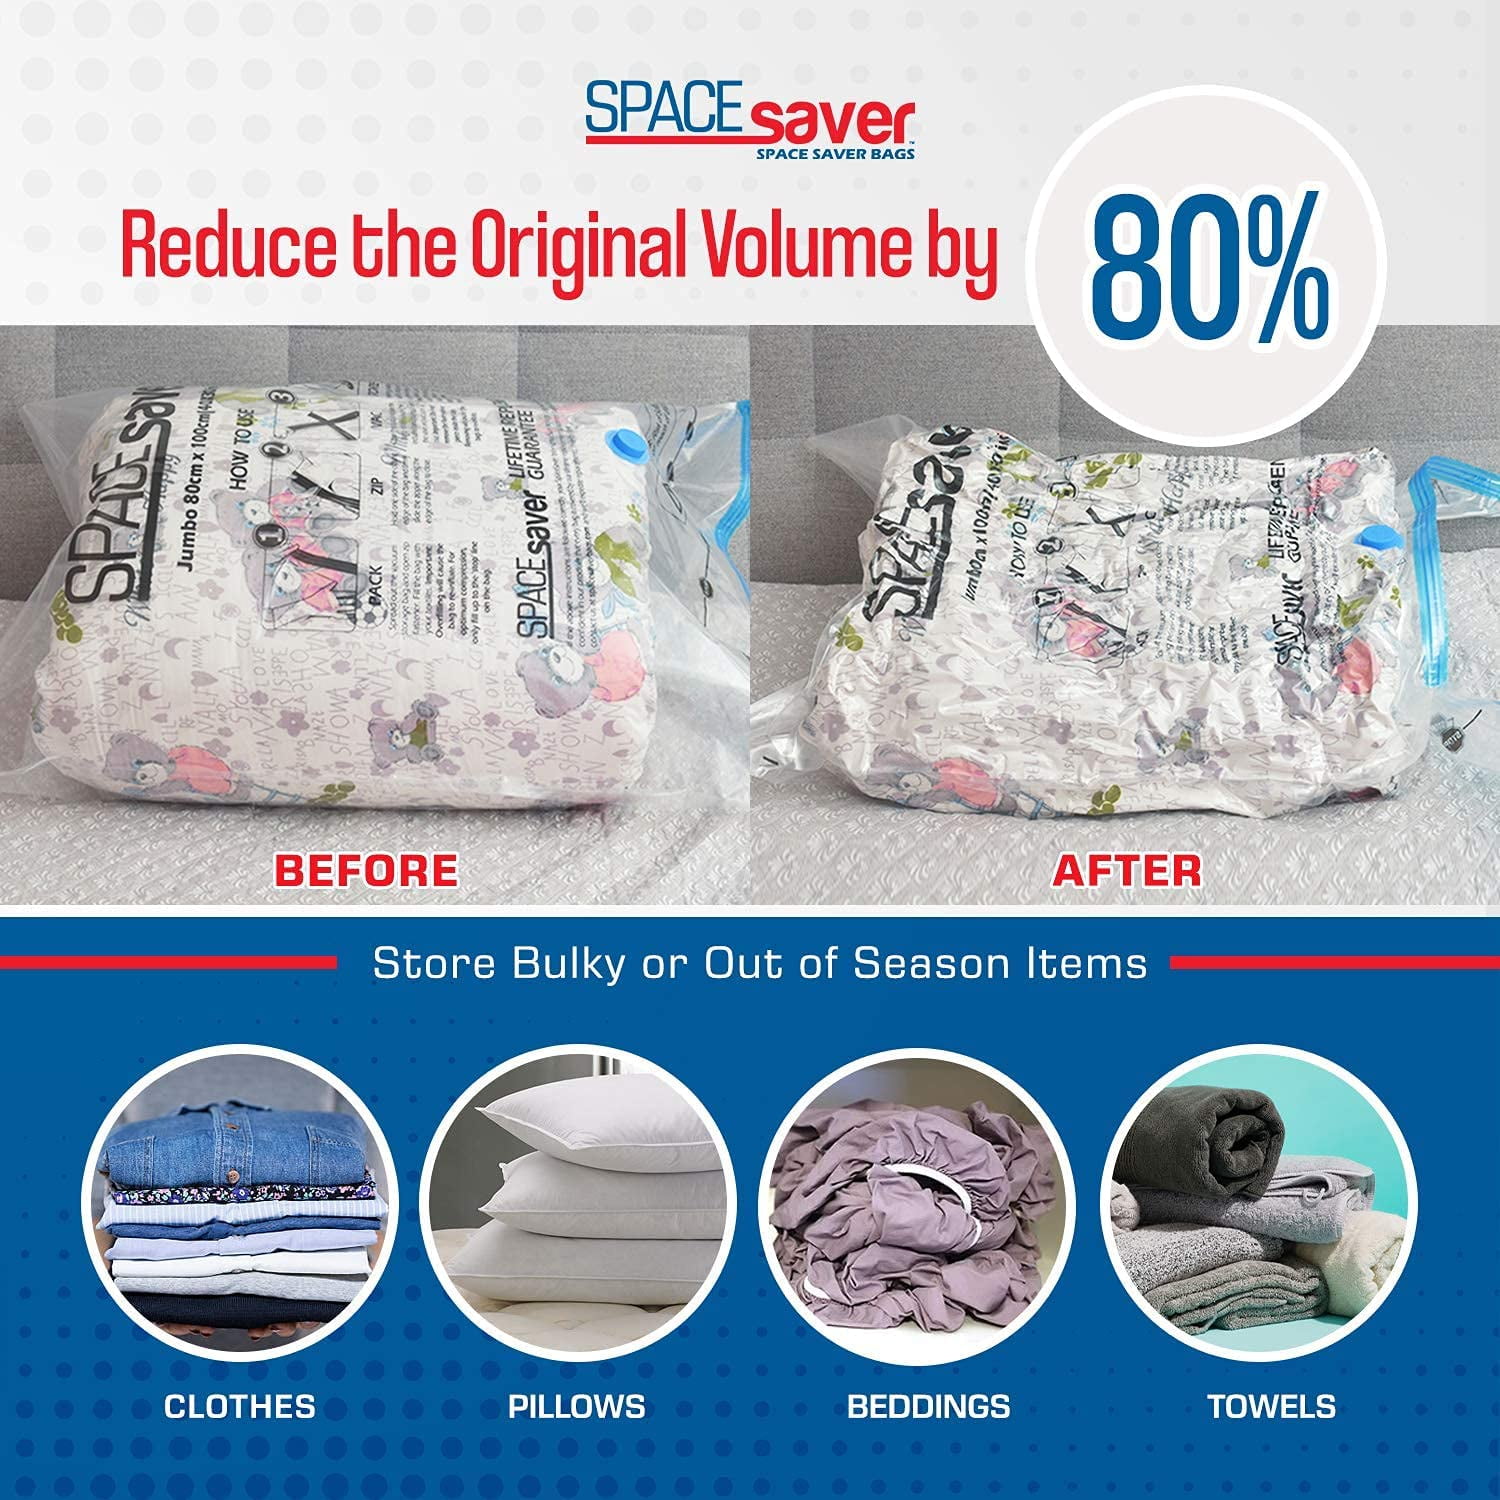 20-Pack Vacuum Storage Bags $19.99 (See Them in Action in The